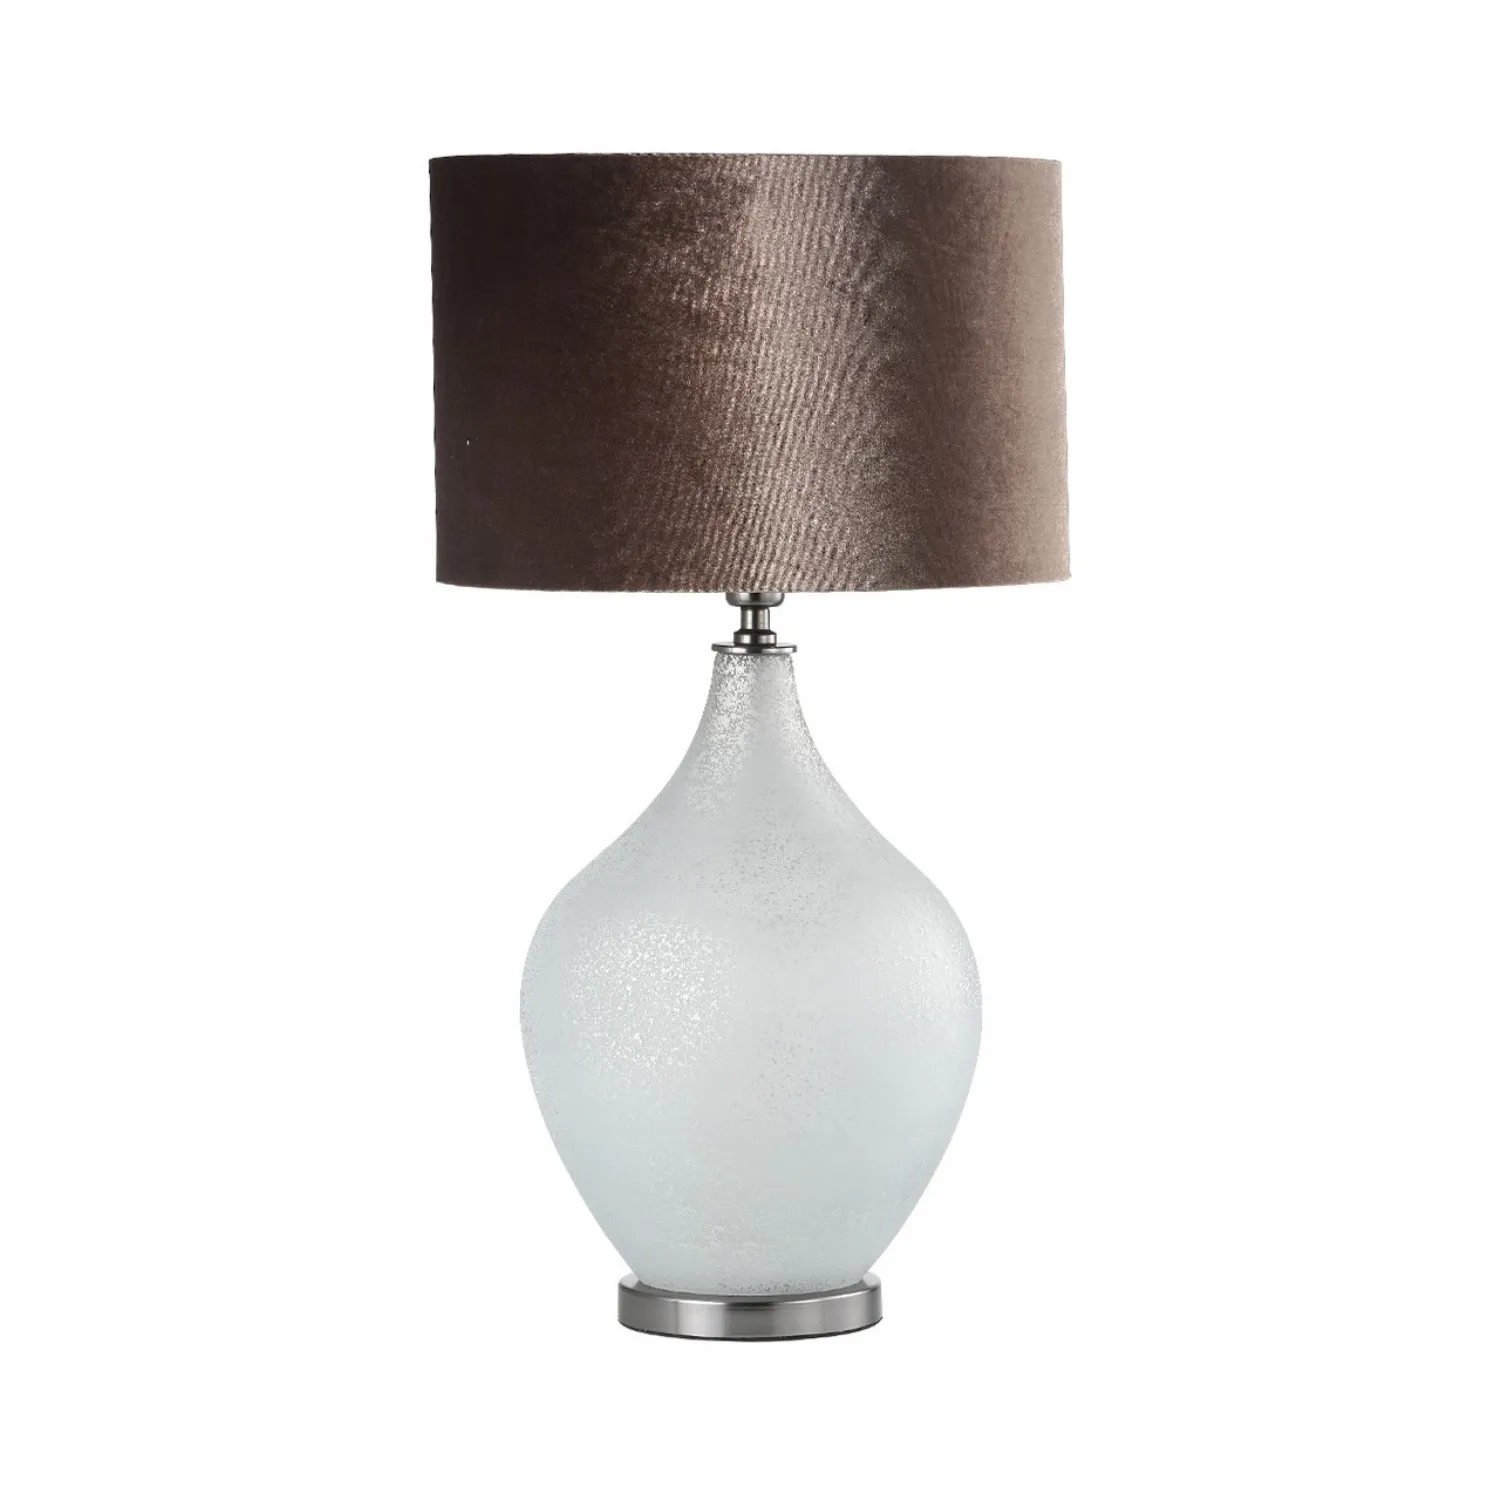 75. 5cm Silver Frost Glass With Mocha Velvet Shade Table Lamp